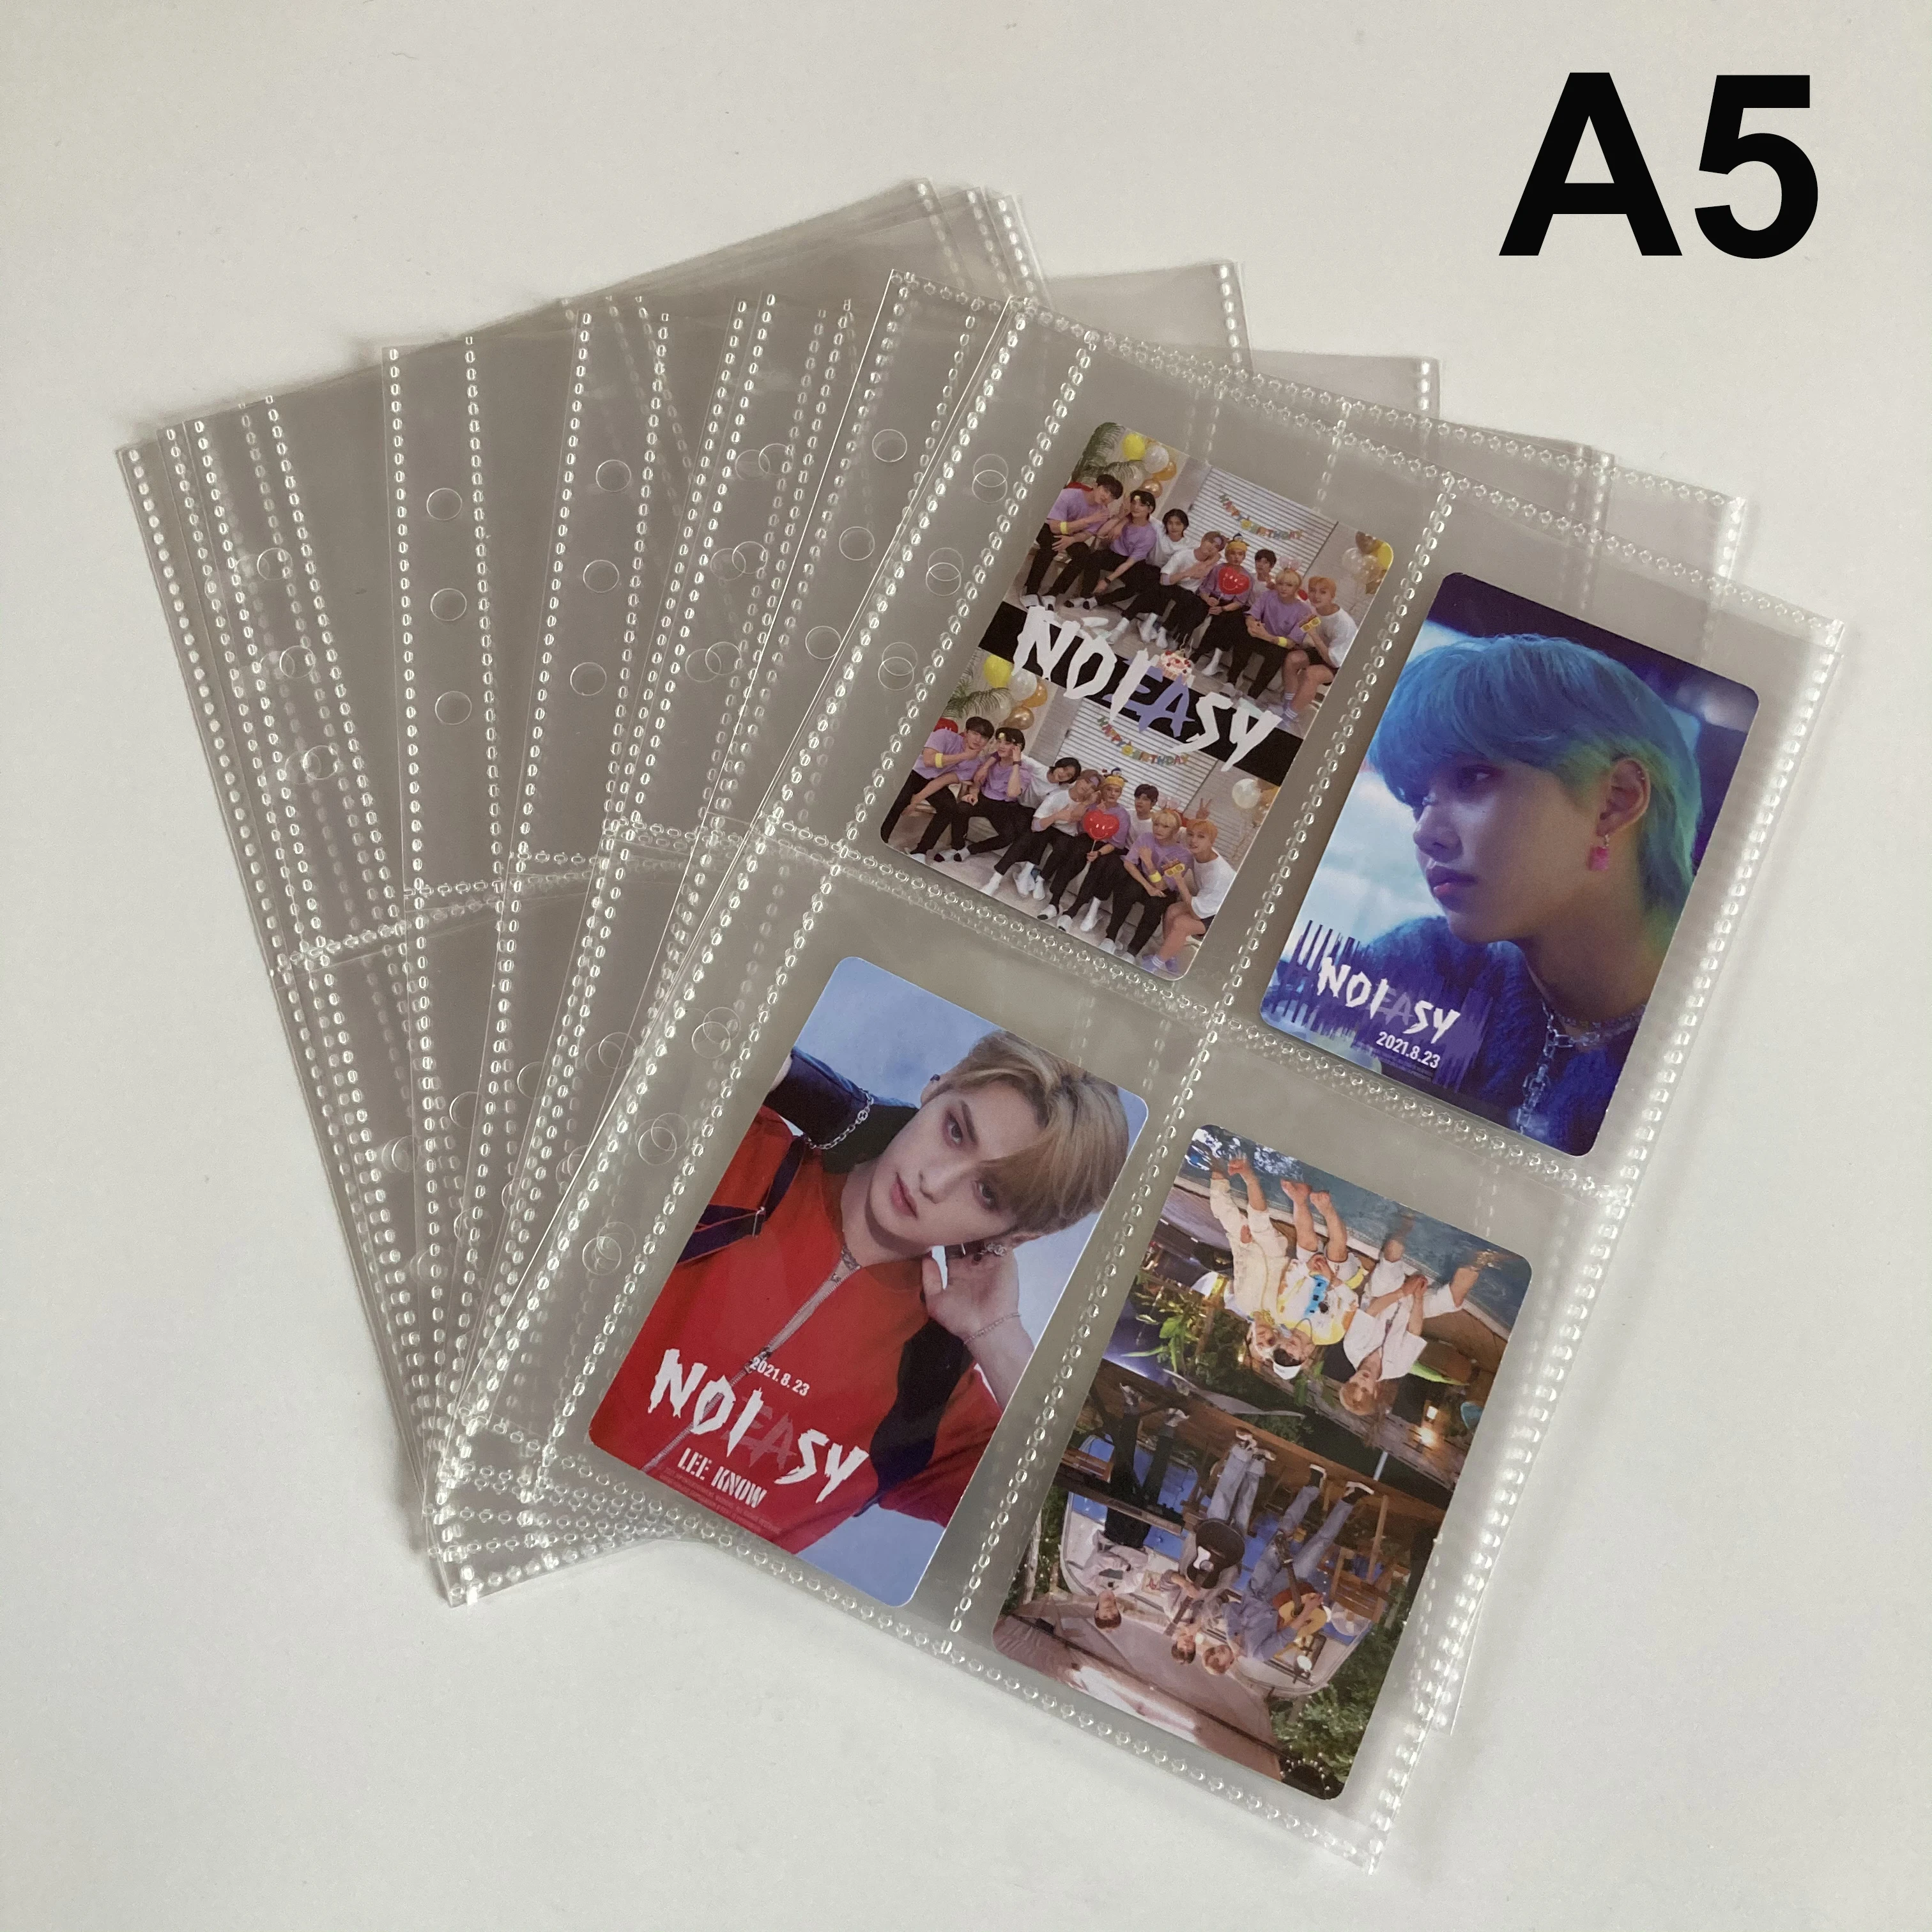 A5 Binder Sleeves Double Sided 1 2 4 Pockets Clear Kpop Photocard Postcard Trading Card Photo Album Sleeves Refill Page PVC Free 50 100 slots photo album pockets storage card holder 3 4 5 inch inner page business card holder photo album organizer storage